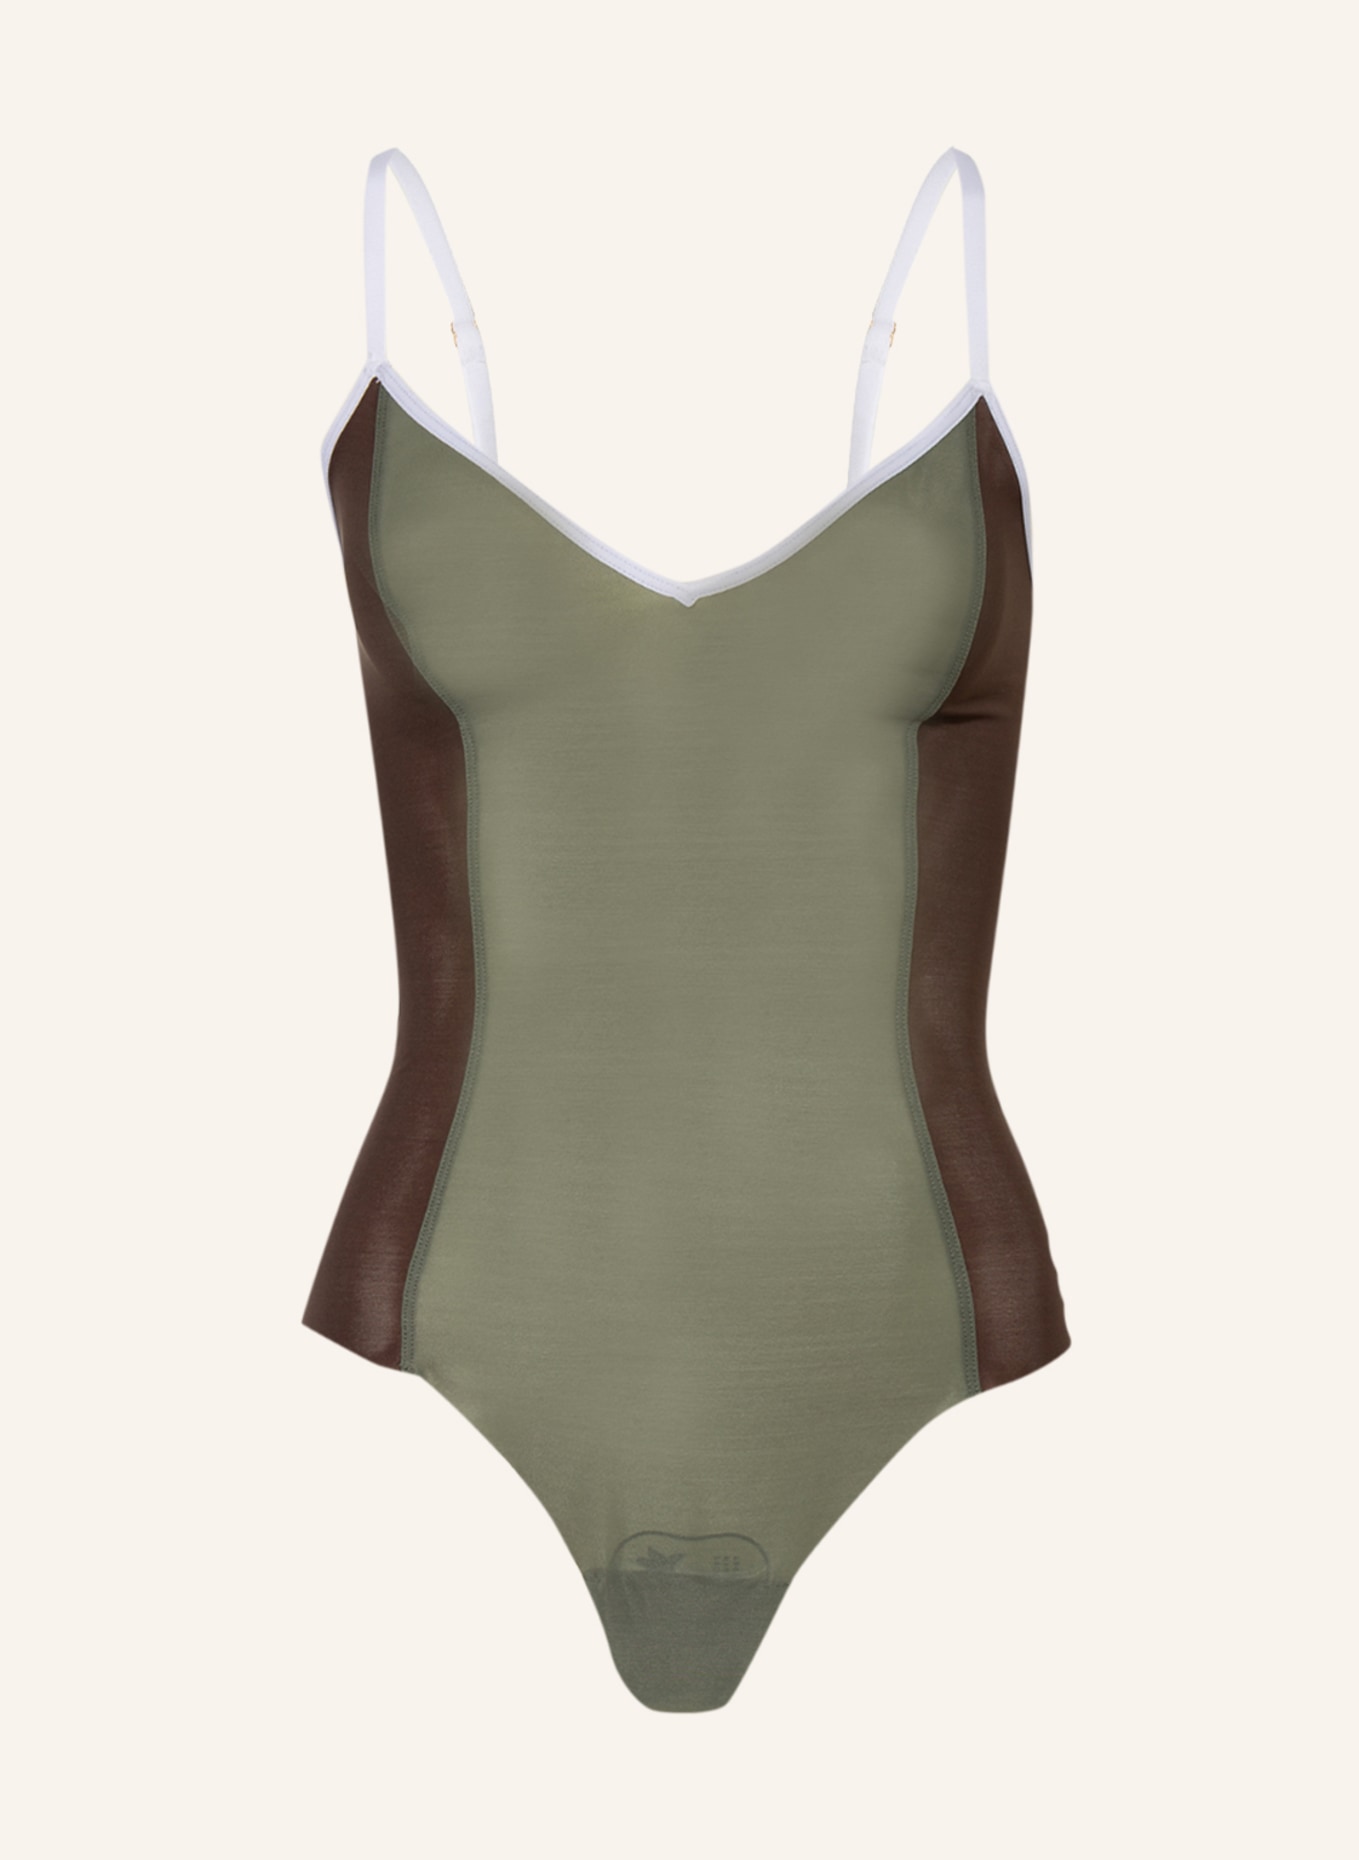 ITEM m6 Thong bodysuit ALL MESH with shaping effect, Color: OLIVE/ BROWN (Image 1)